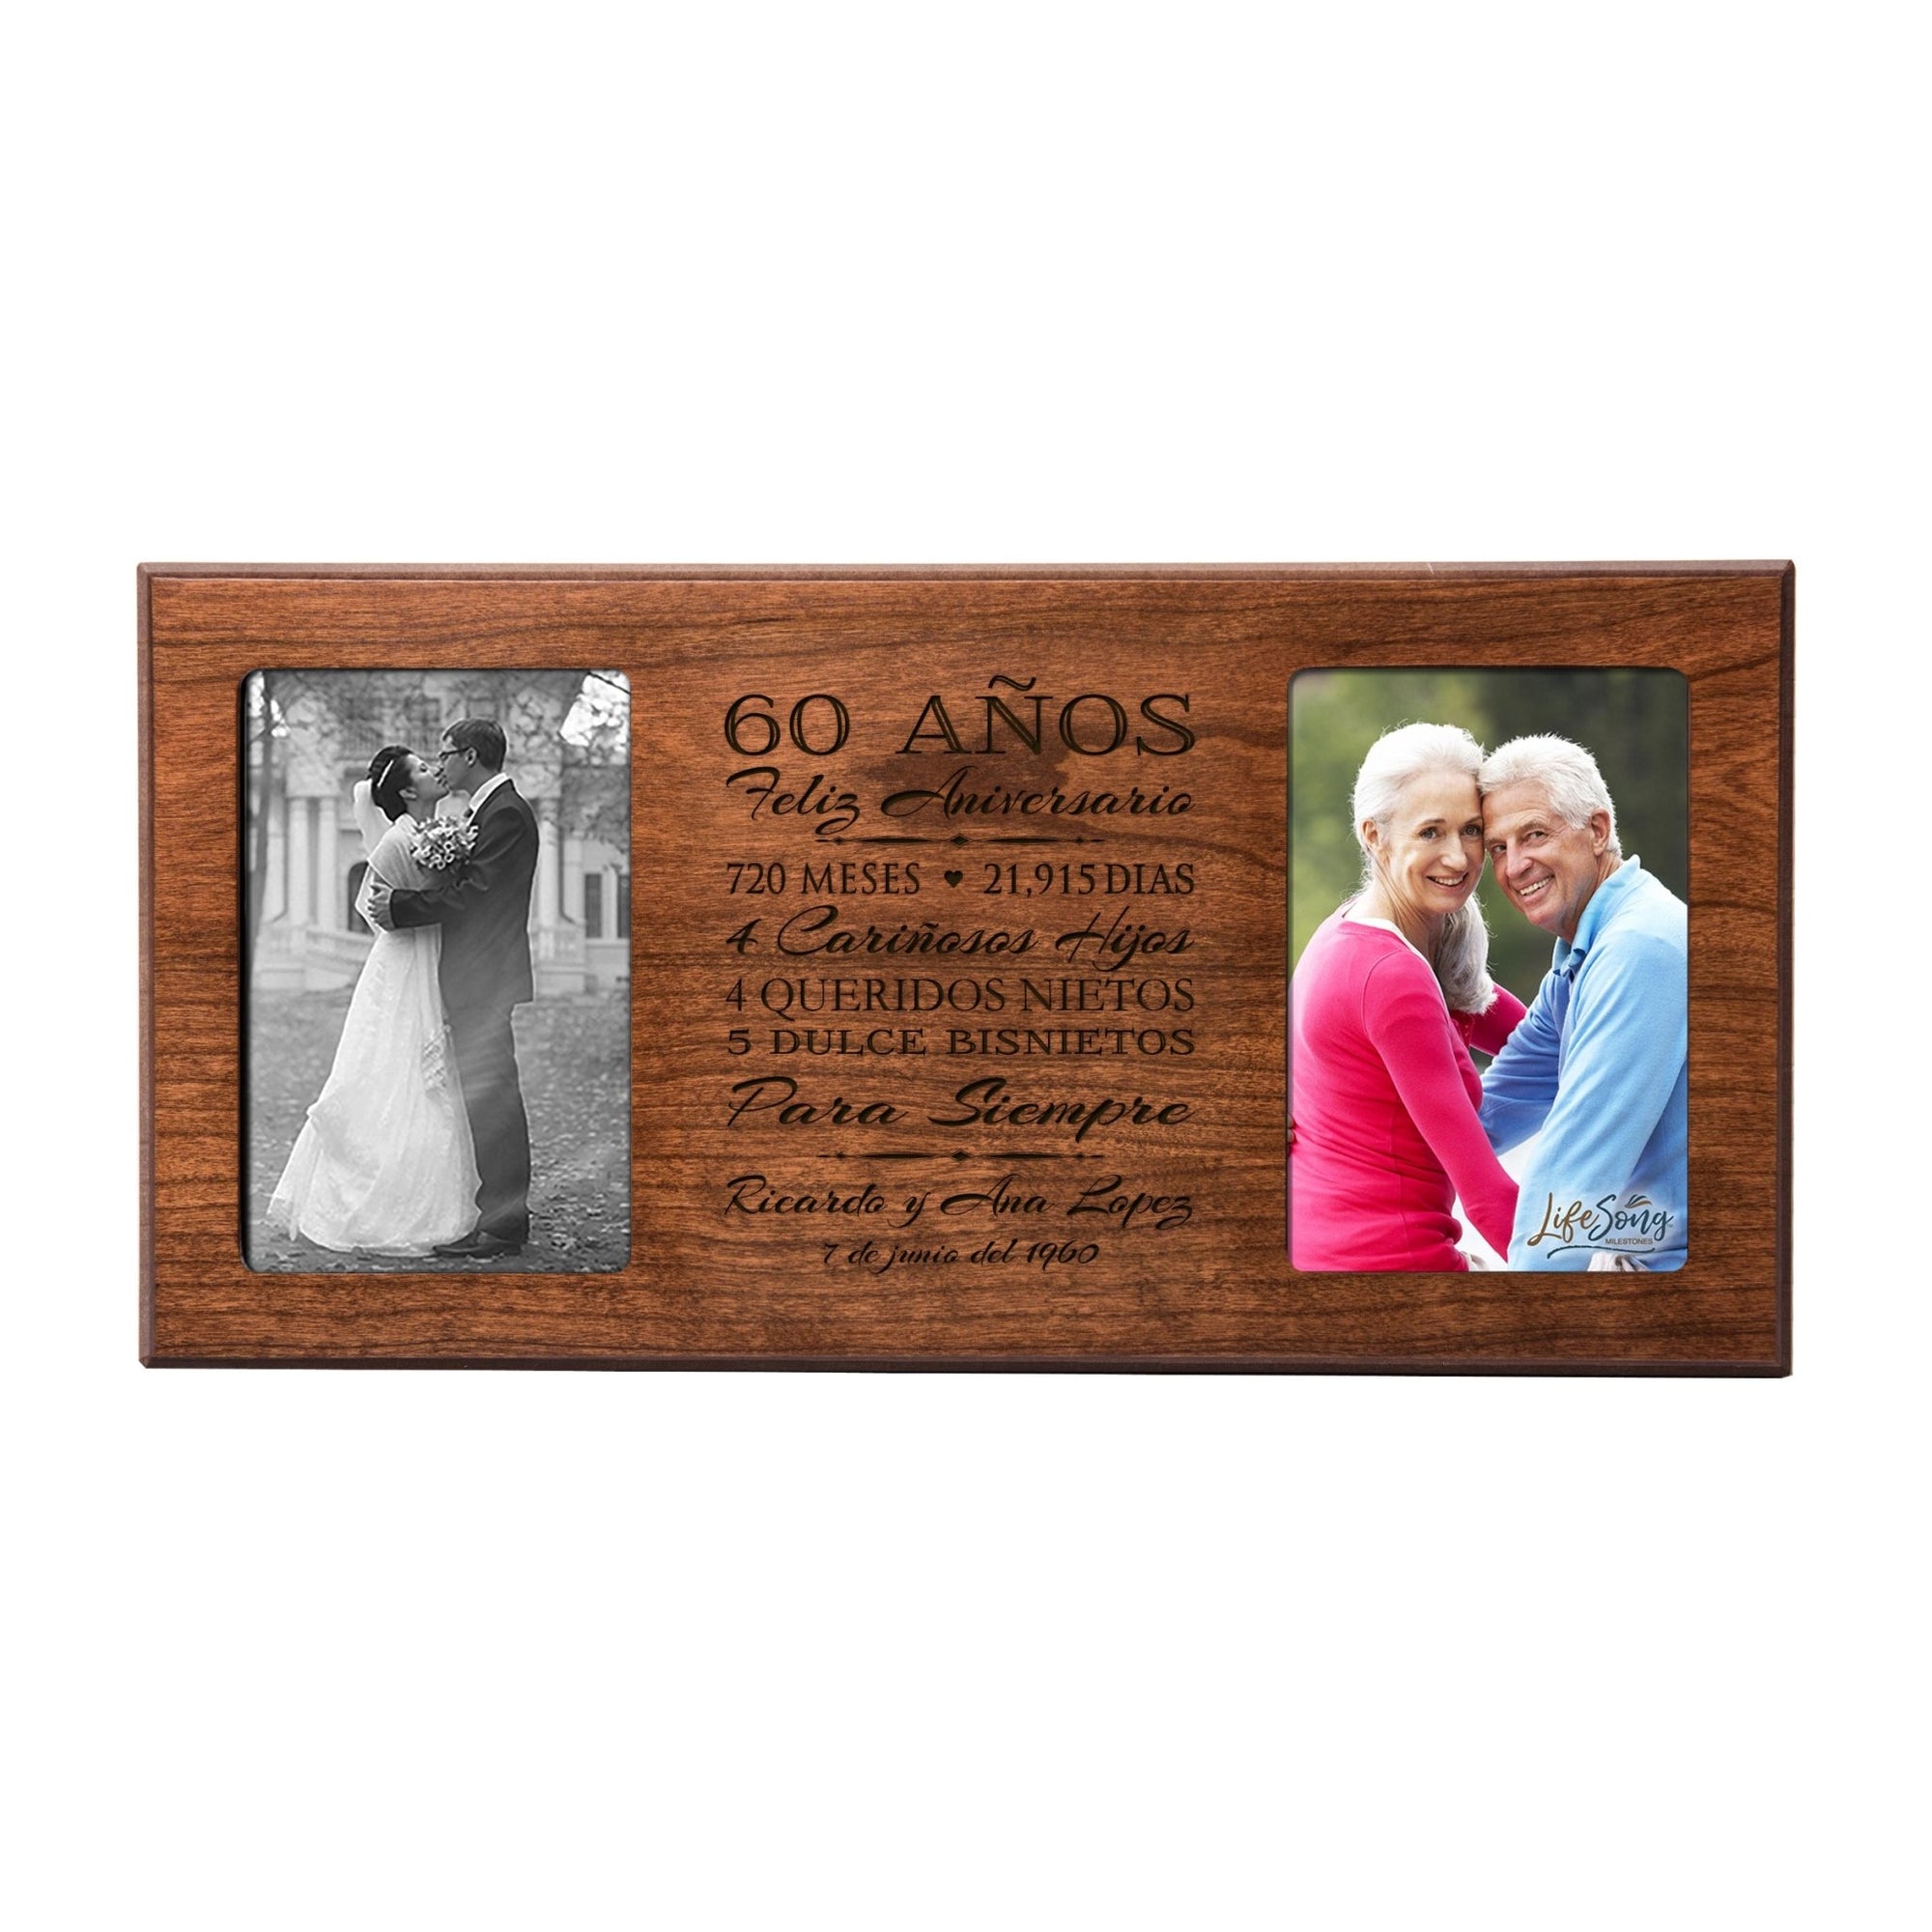 Lifesong Milestones Personalized Couples 60th Wedding Anniversary Spanish Picture Frame